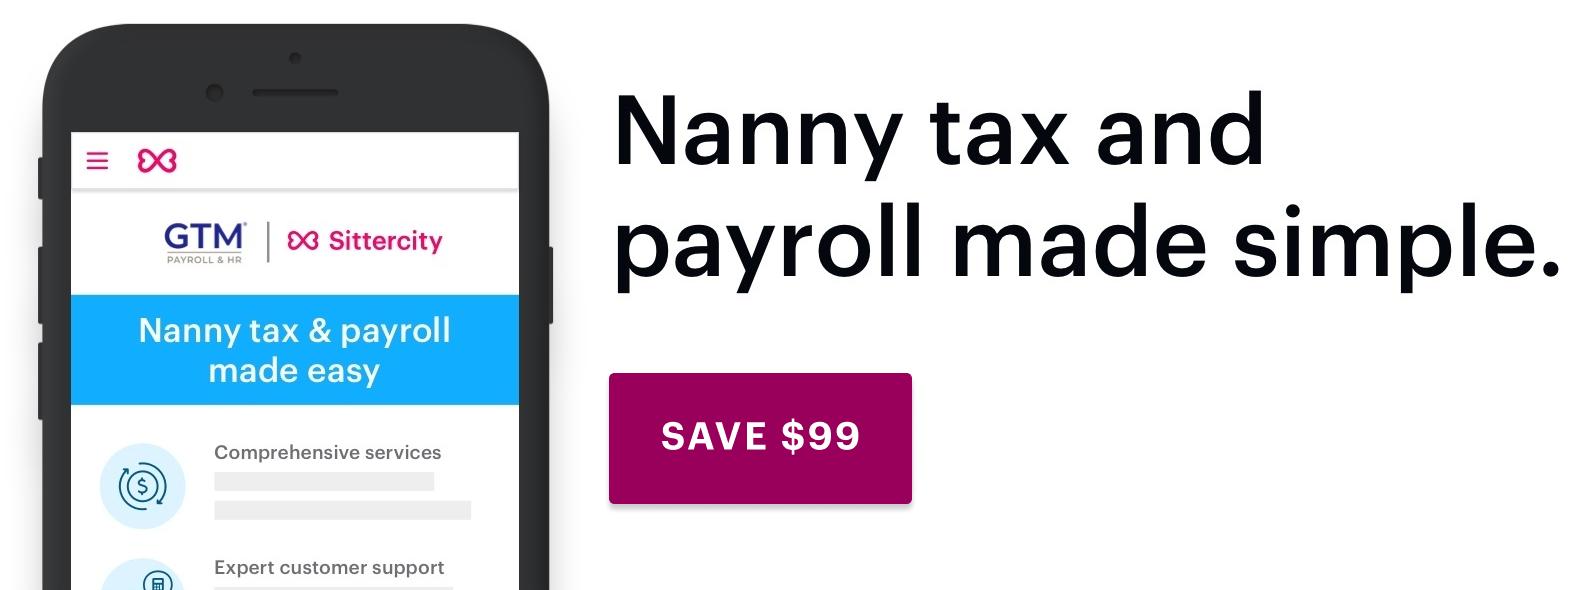 Banner image showing a phone and text that says, "Nanny tax and payroll made simple."